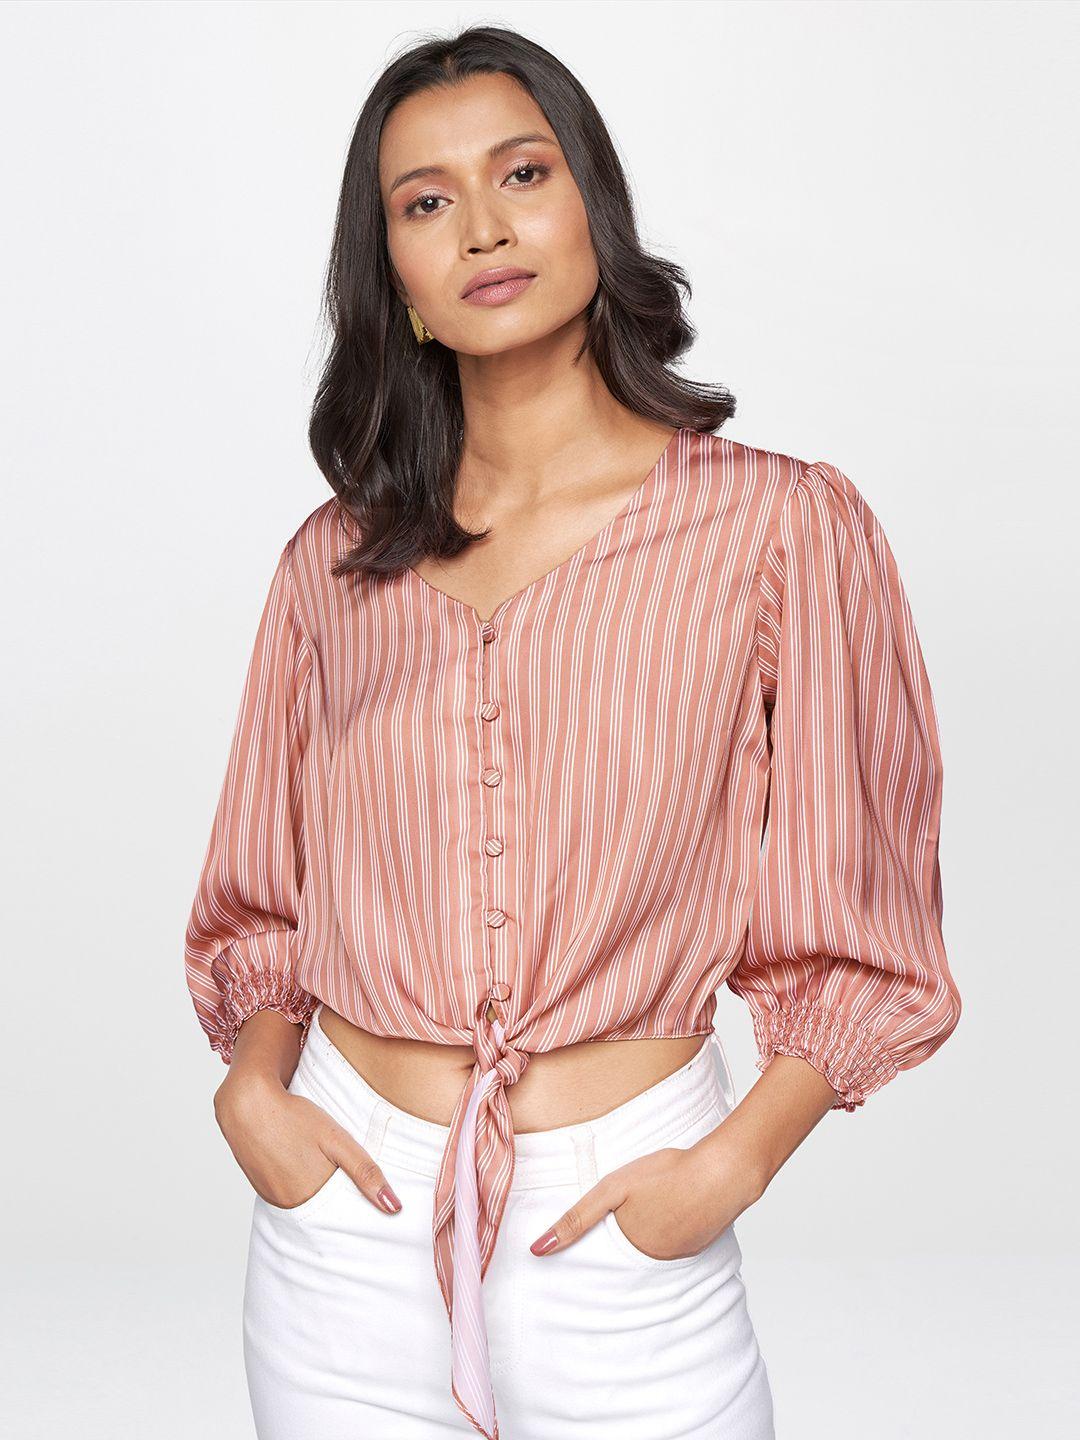 and women peach-coloured striped shirt style crop top